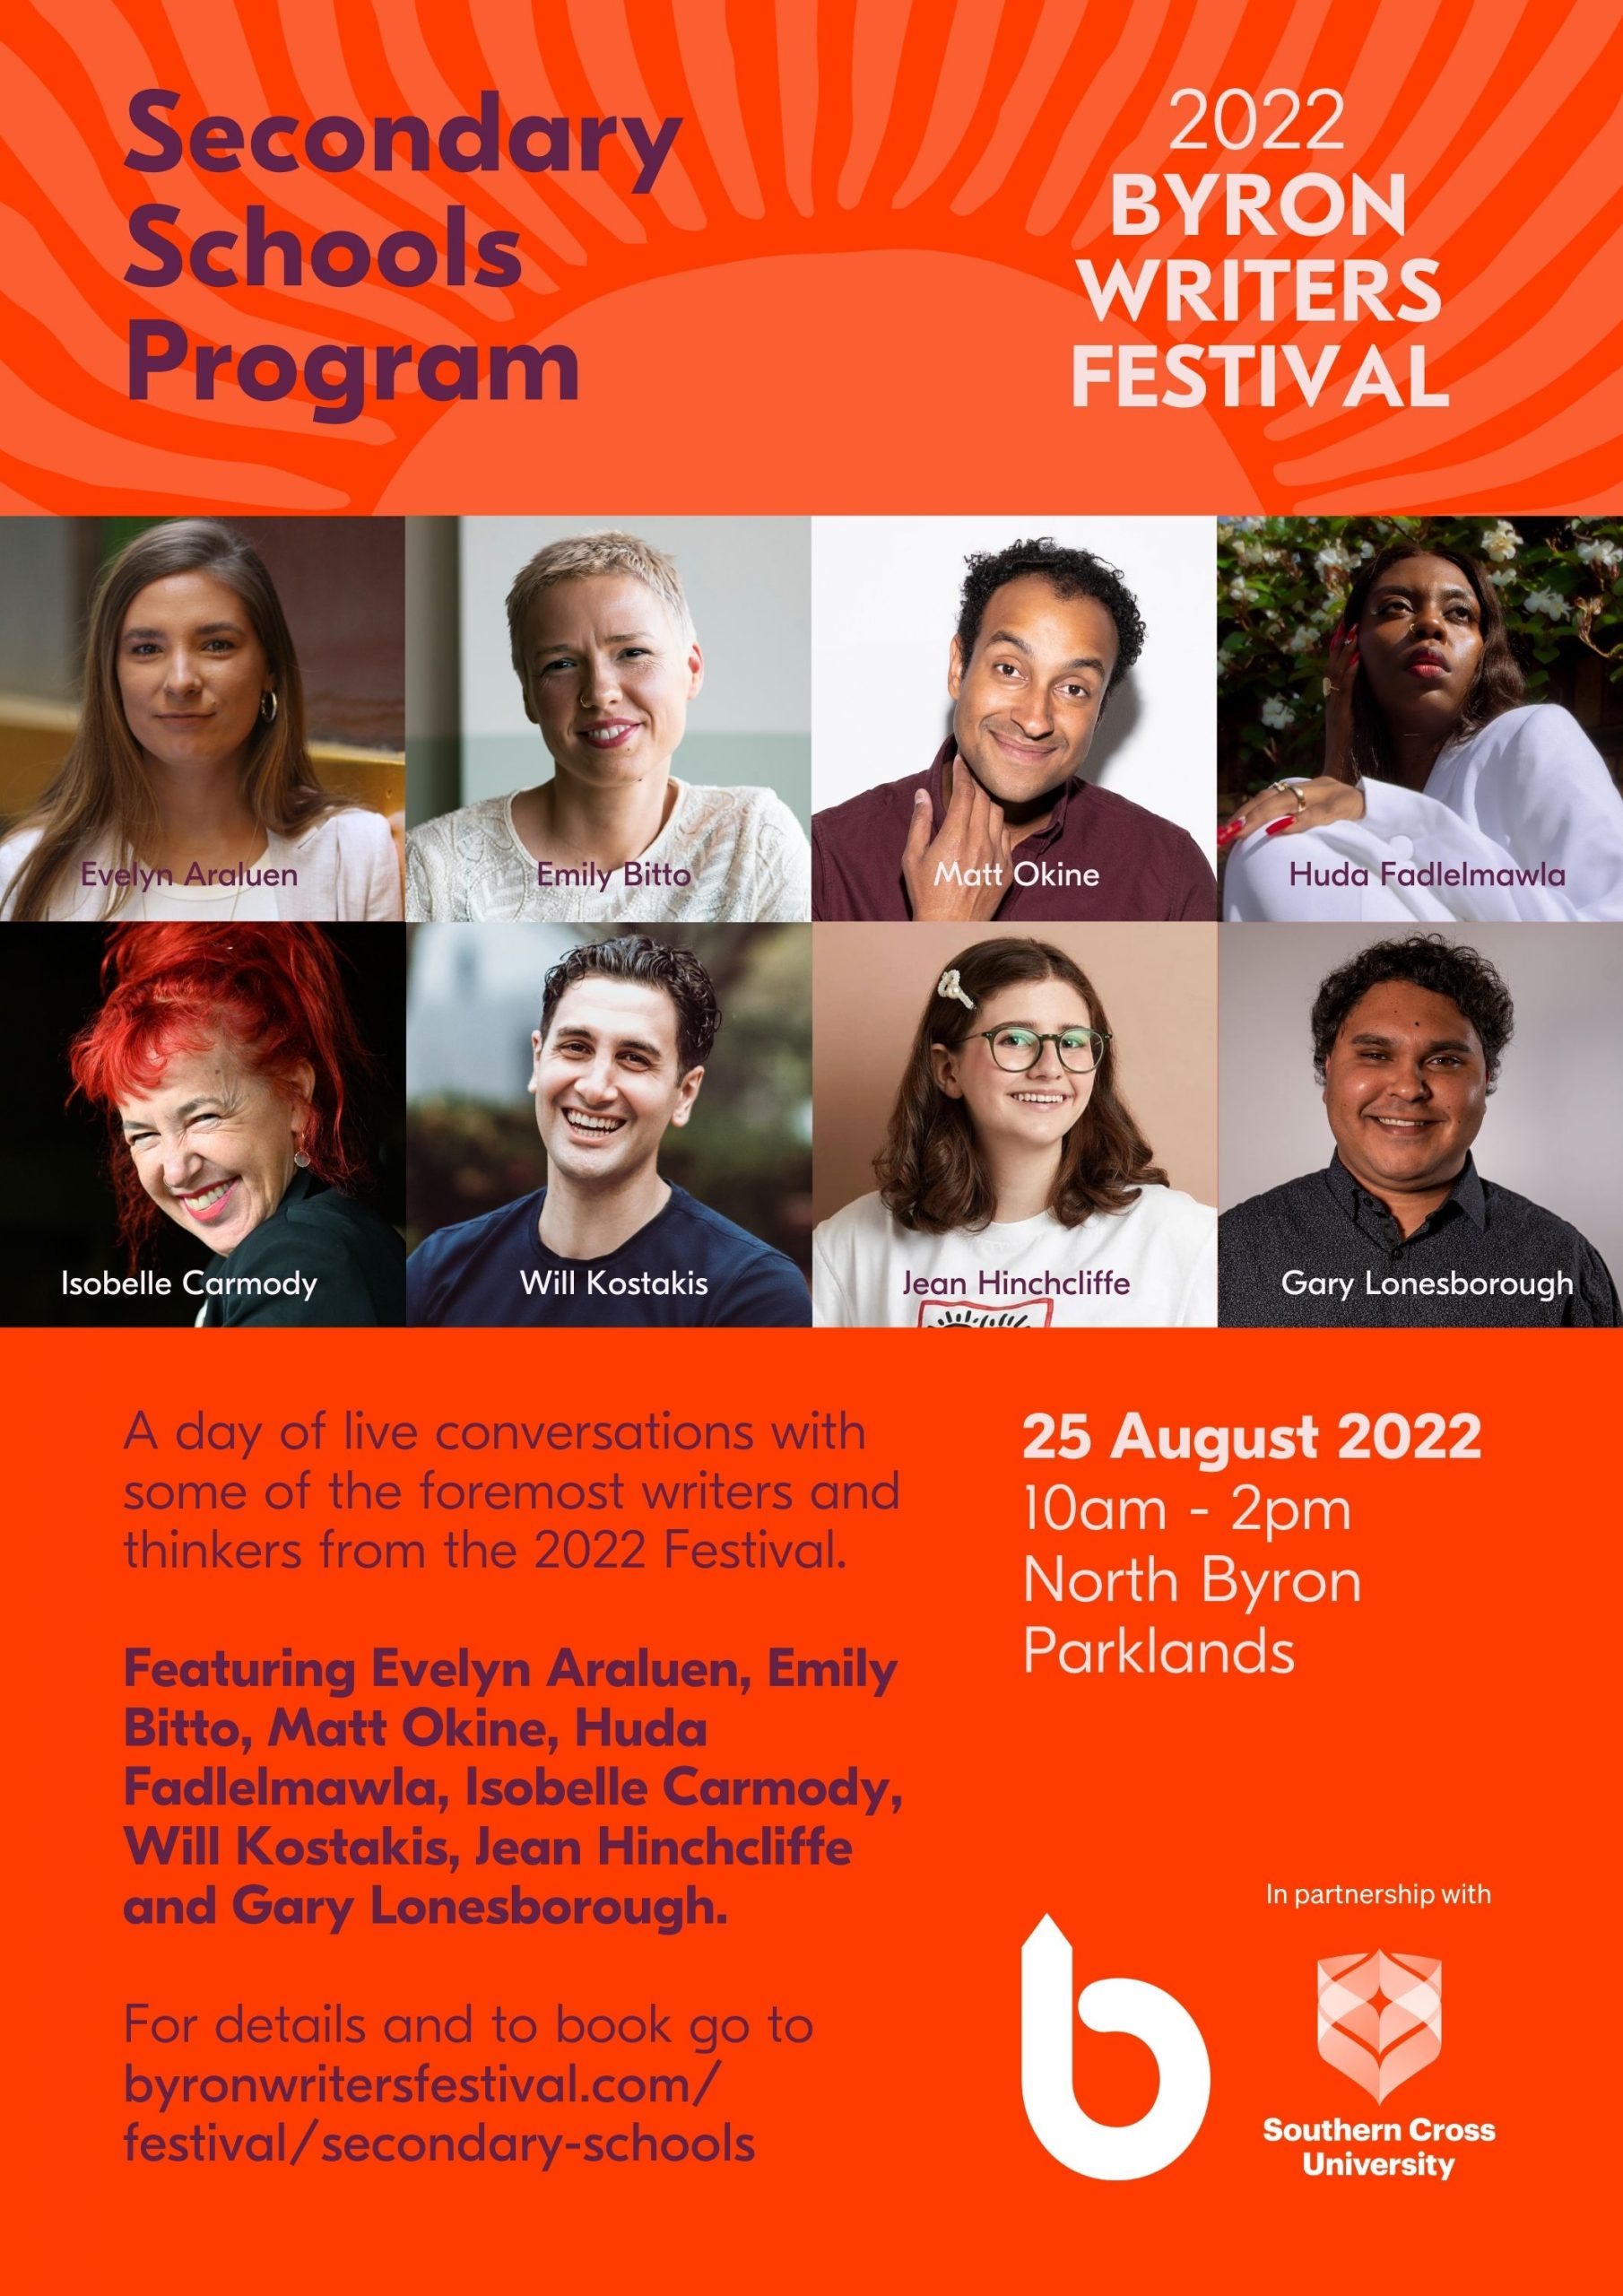 https://byronwritersfestival.com/wp-content/uploads/2022/06/Secondary-Schools-2022-A4-Poster-scaled.jpg